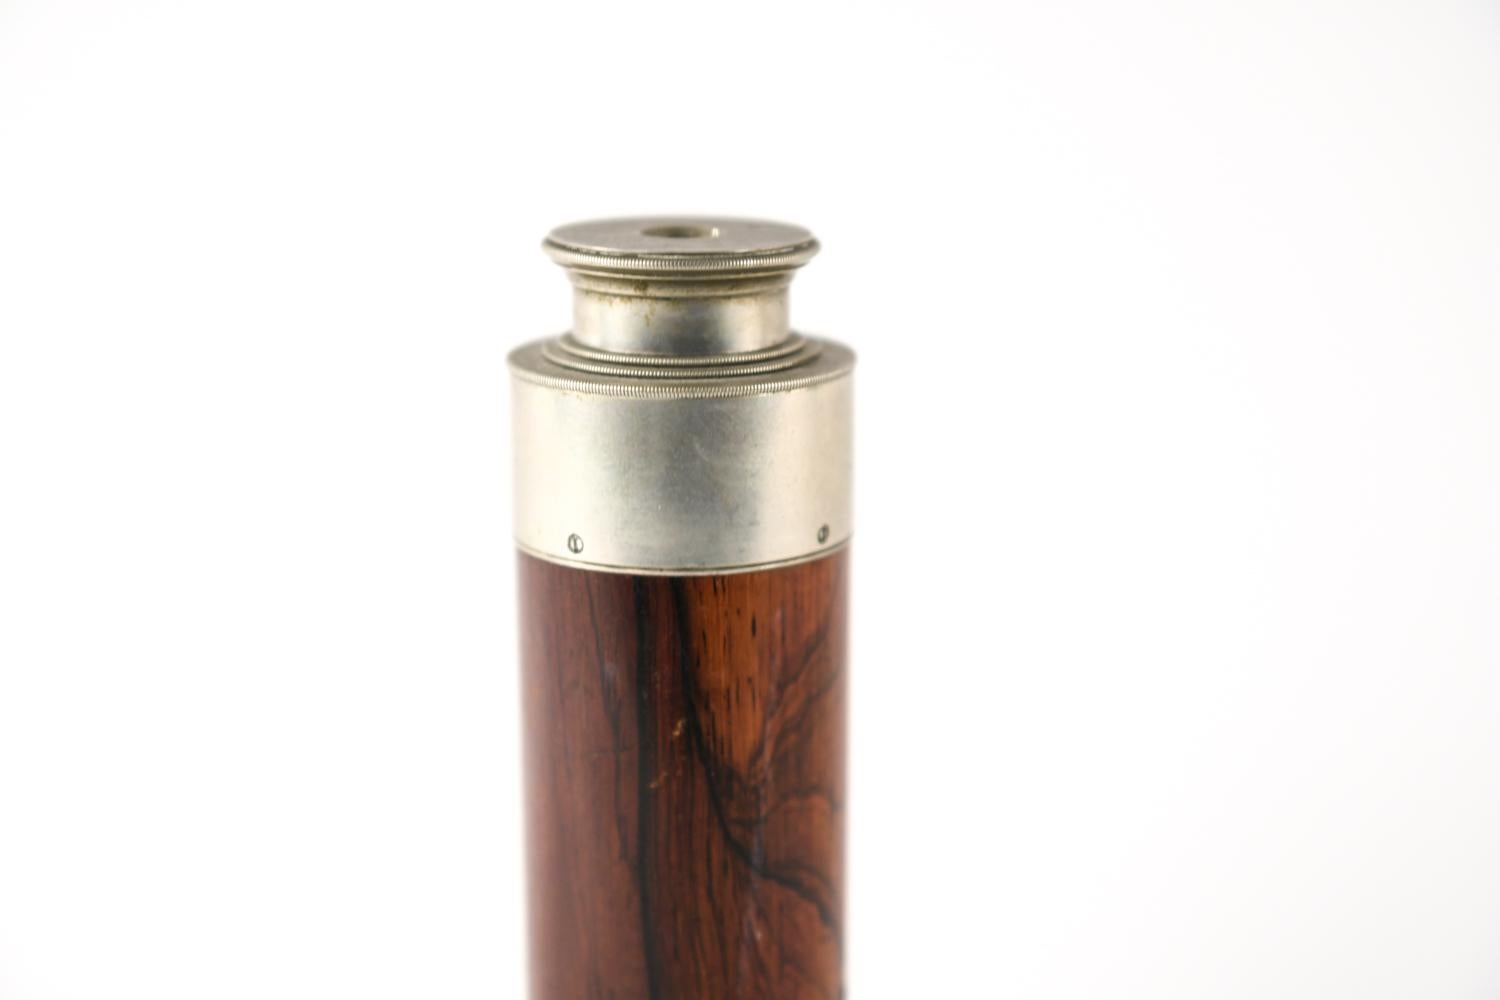 D.E. Wood Inscribed Nautical Telescope & Compass with Rosewood Barrel, c. 1860s 2